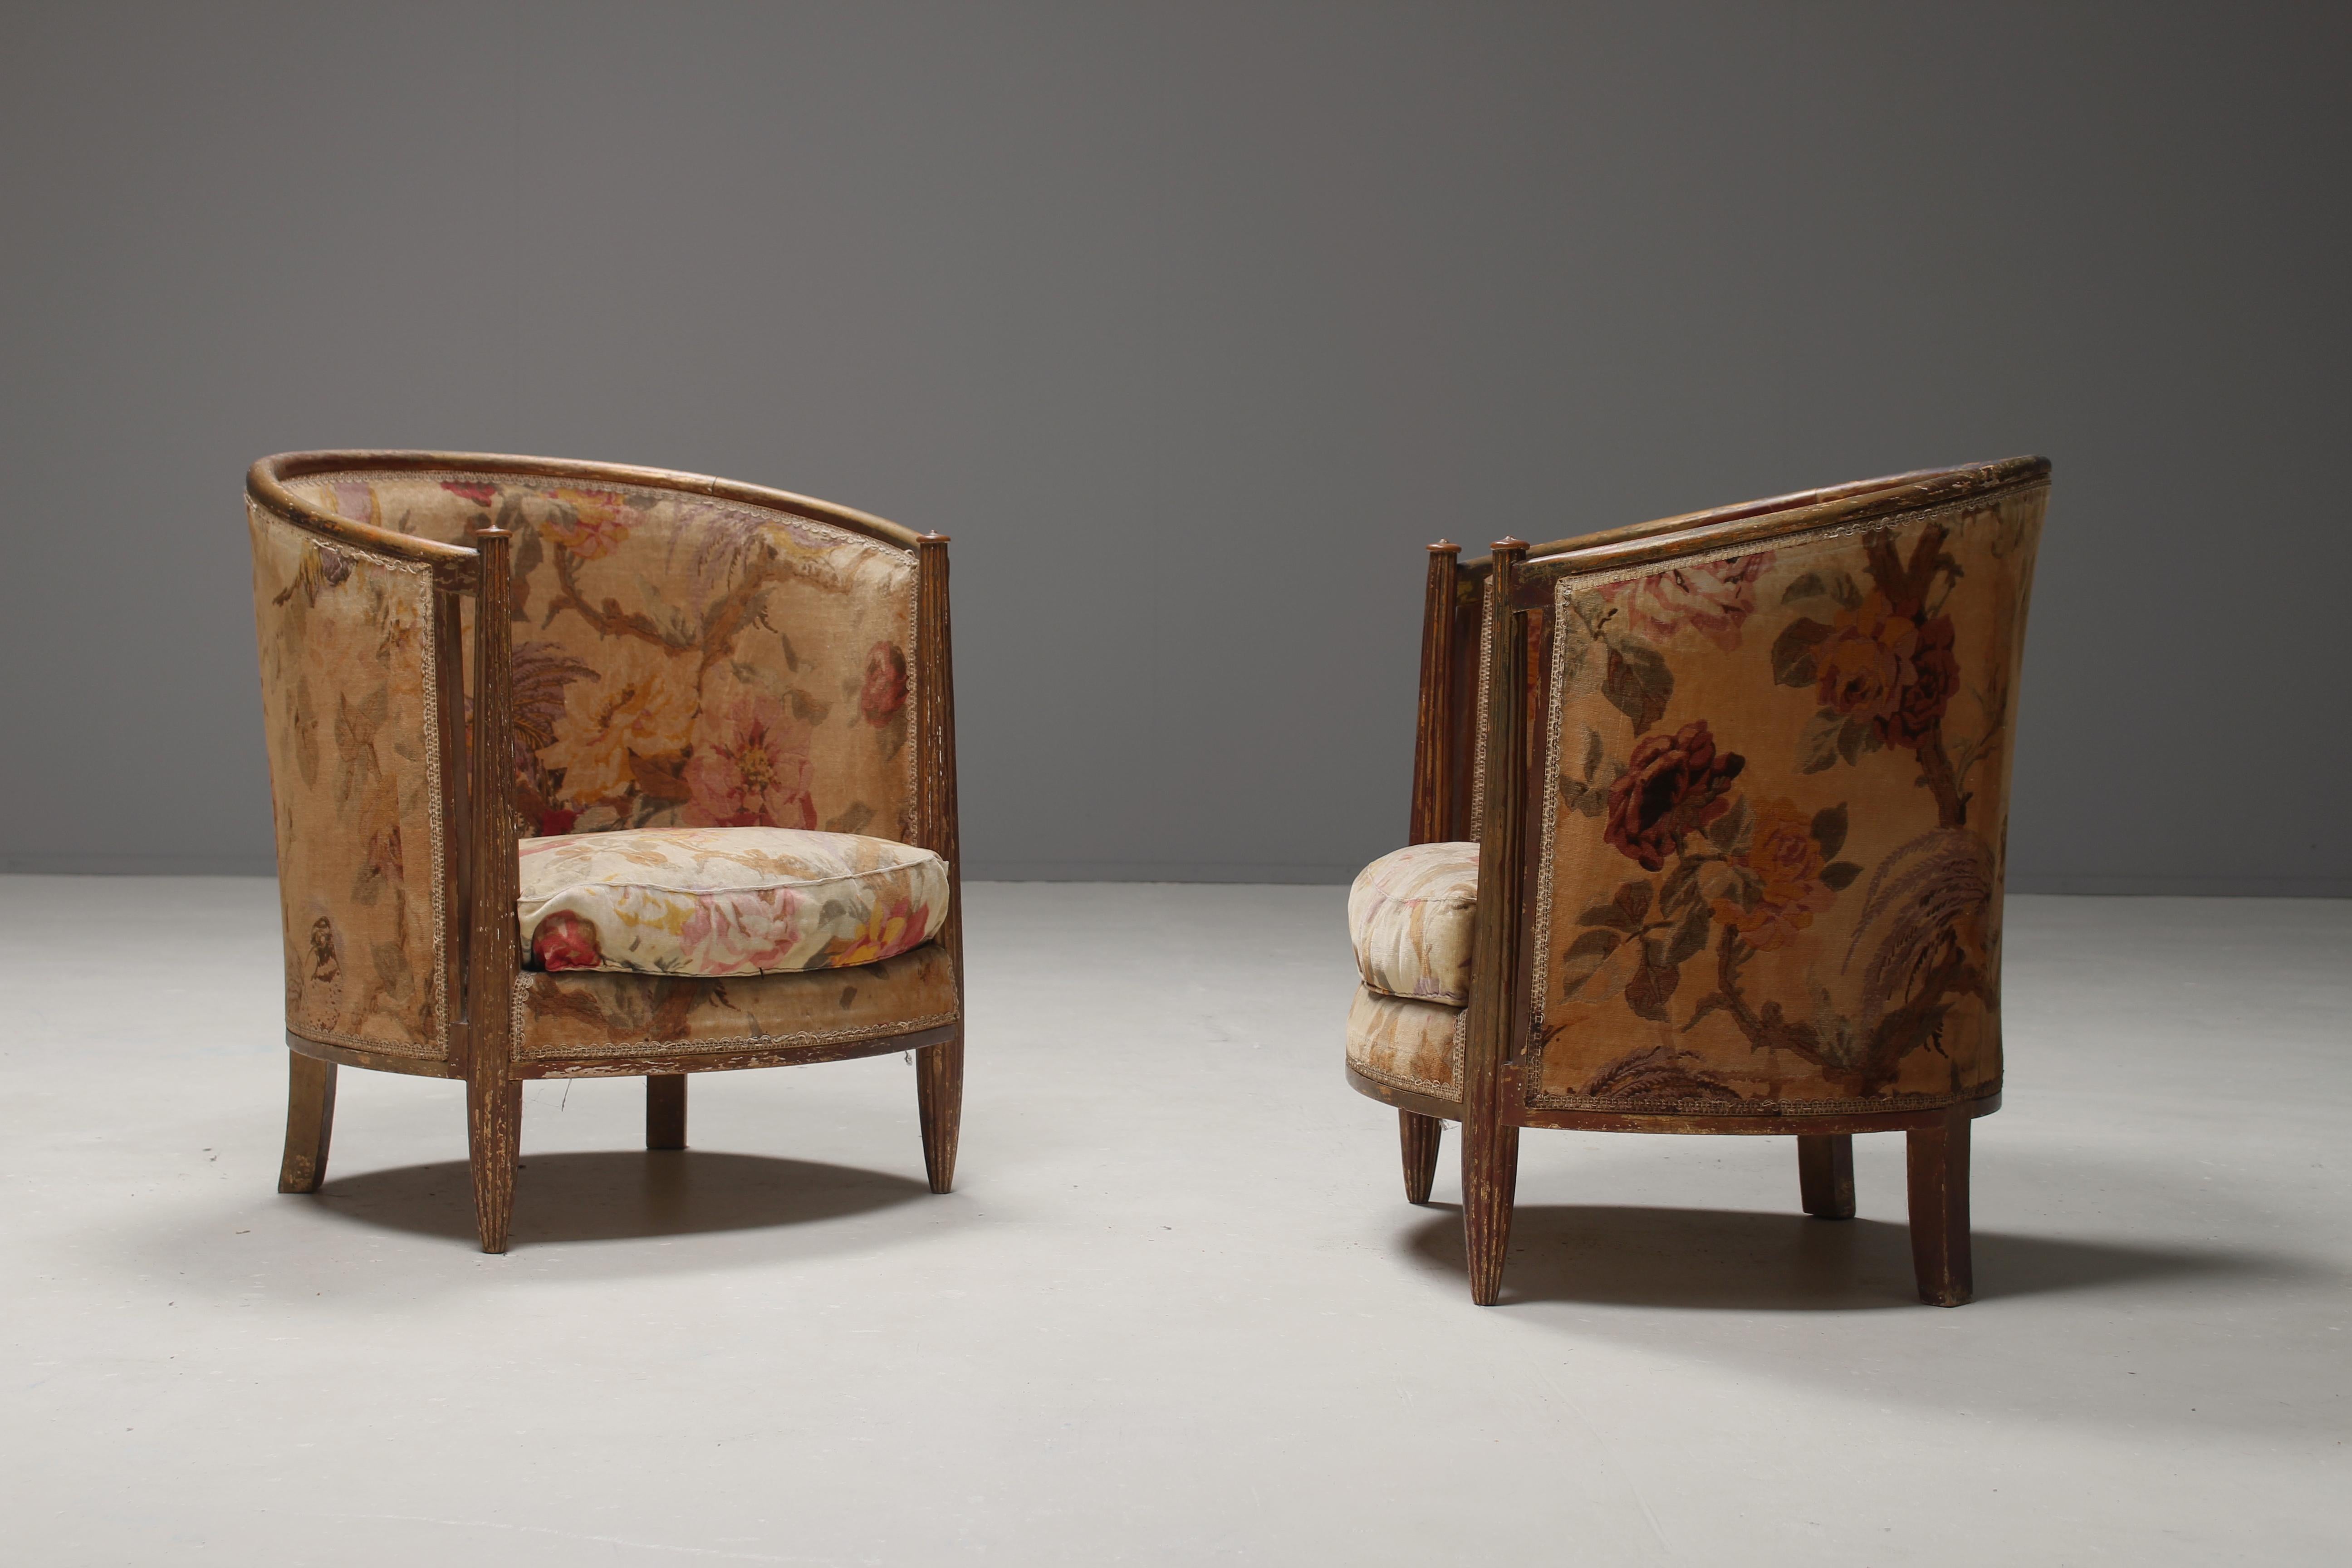 Important Early and Rare Gilded Paul Follot Art Nouveau Club Chairs, 1911 For Sale 13